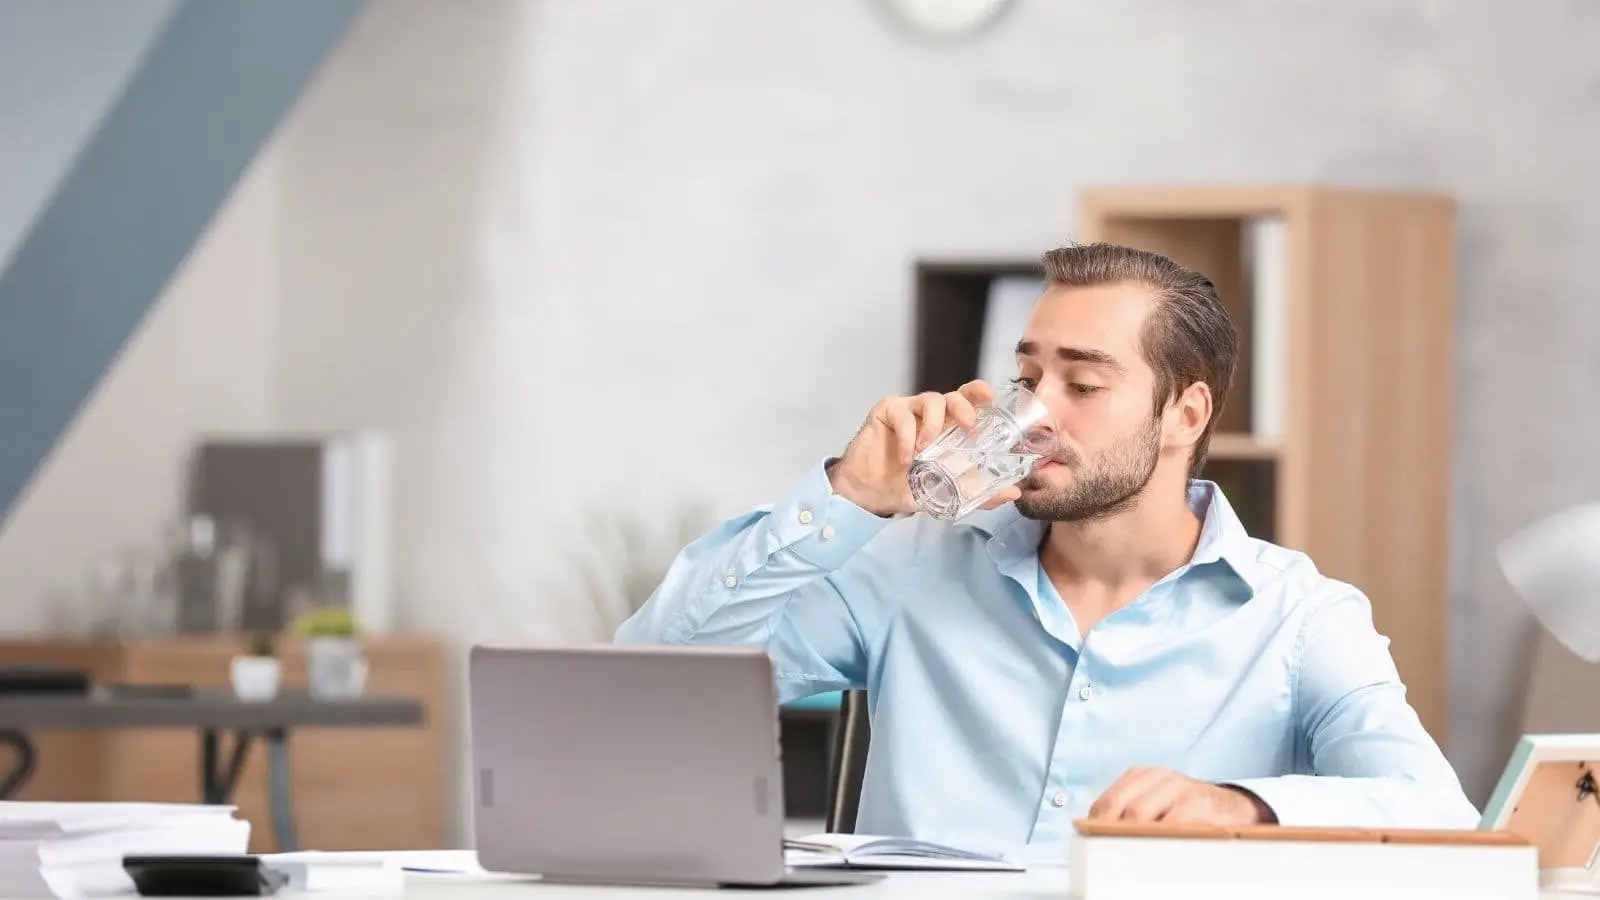 man drinking water while sitting in front of laptop